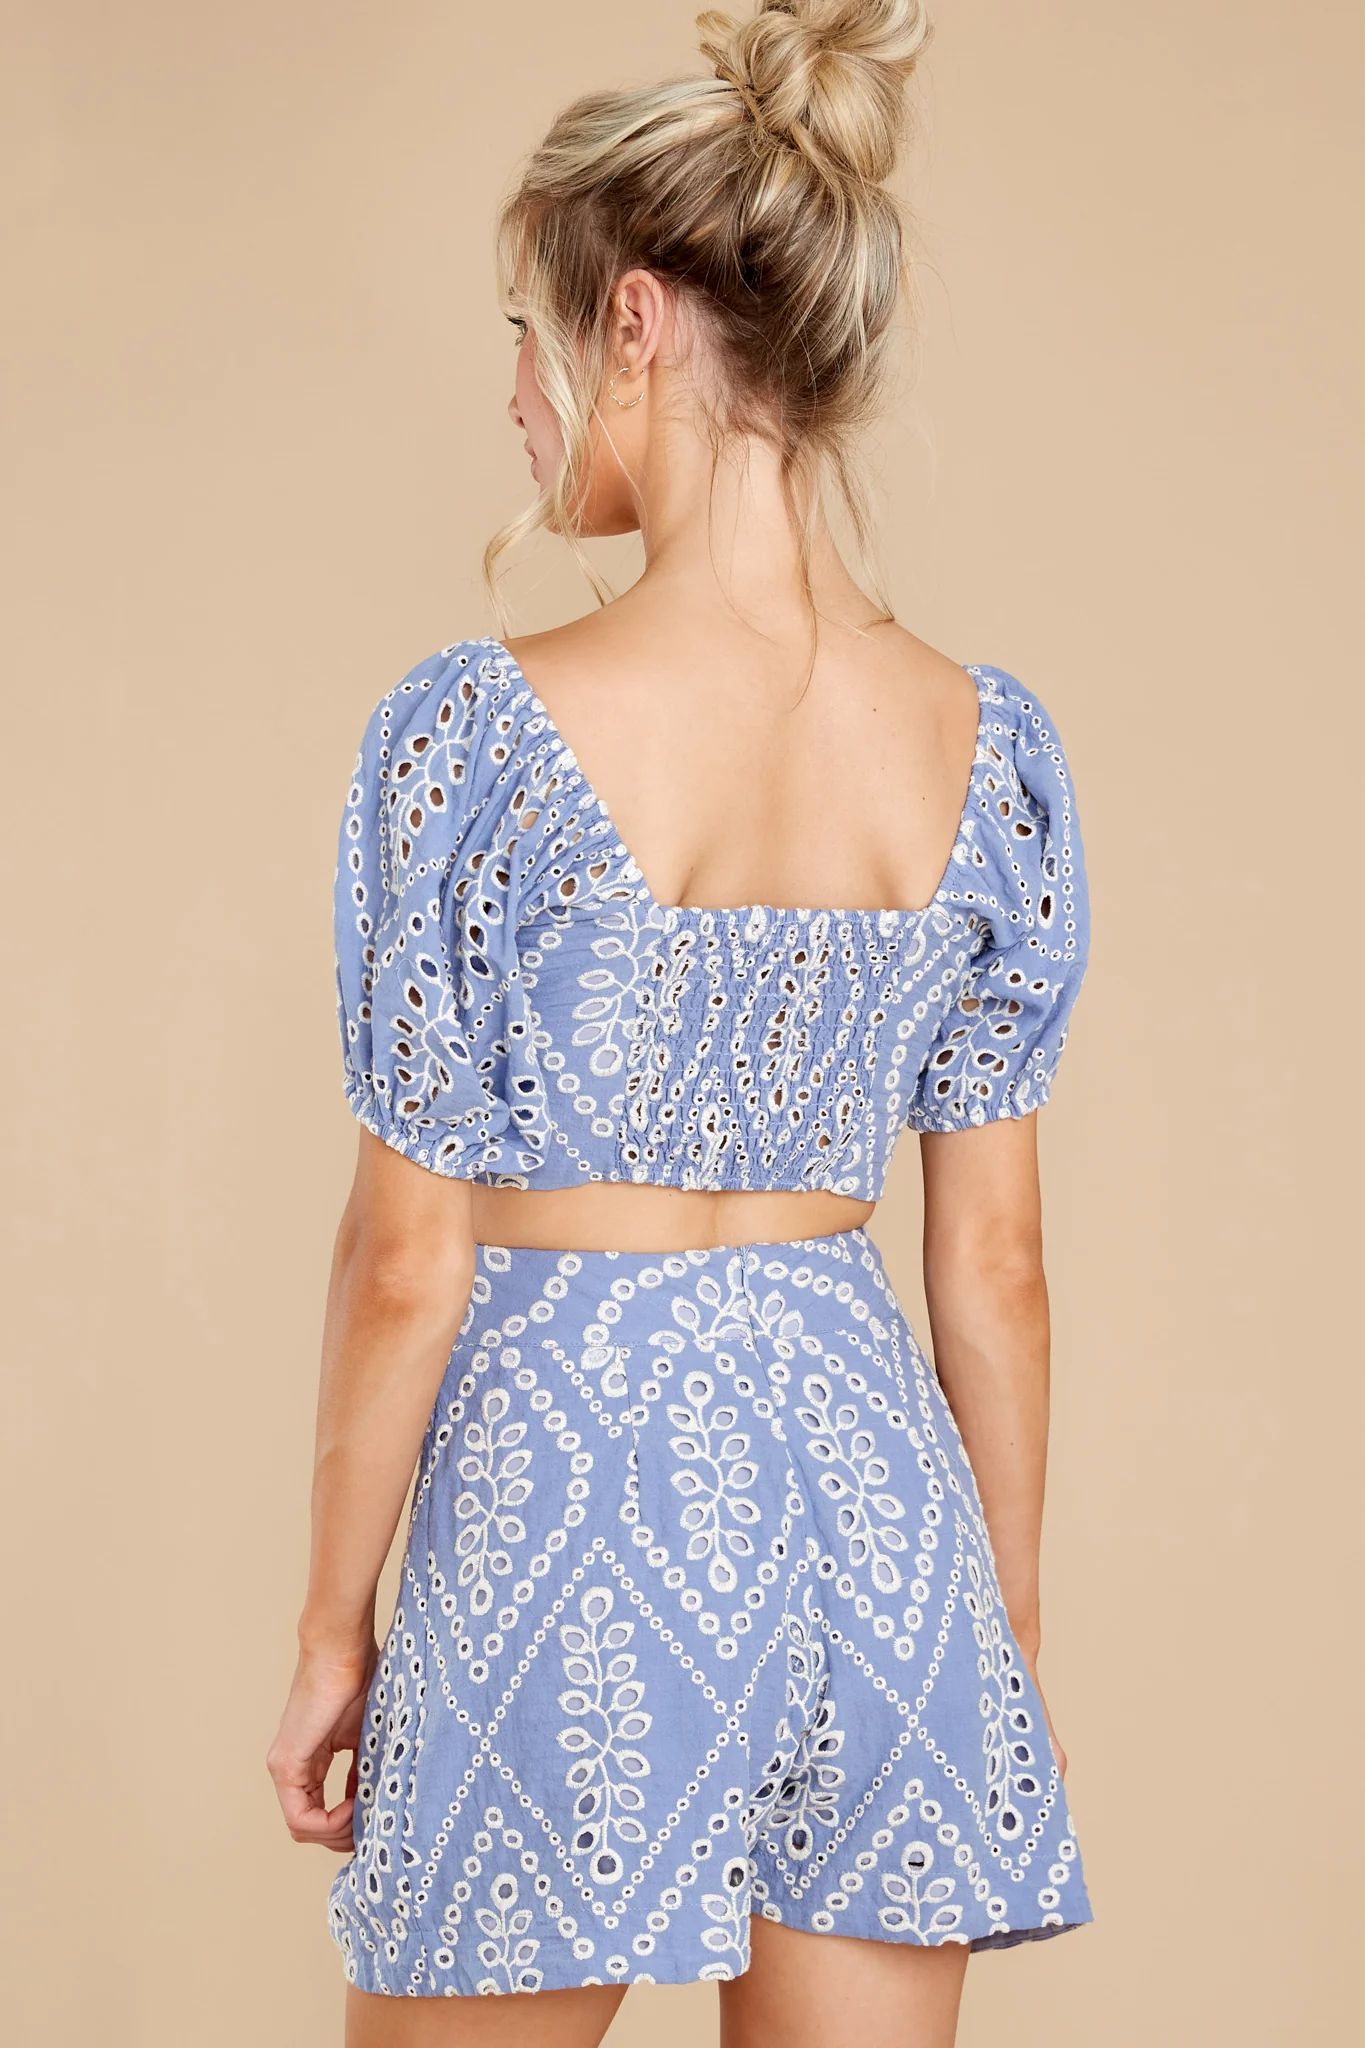 Limitless Expectations Dusty Blue Eyelet Two Piece Set | Red Dress 